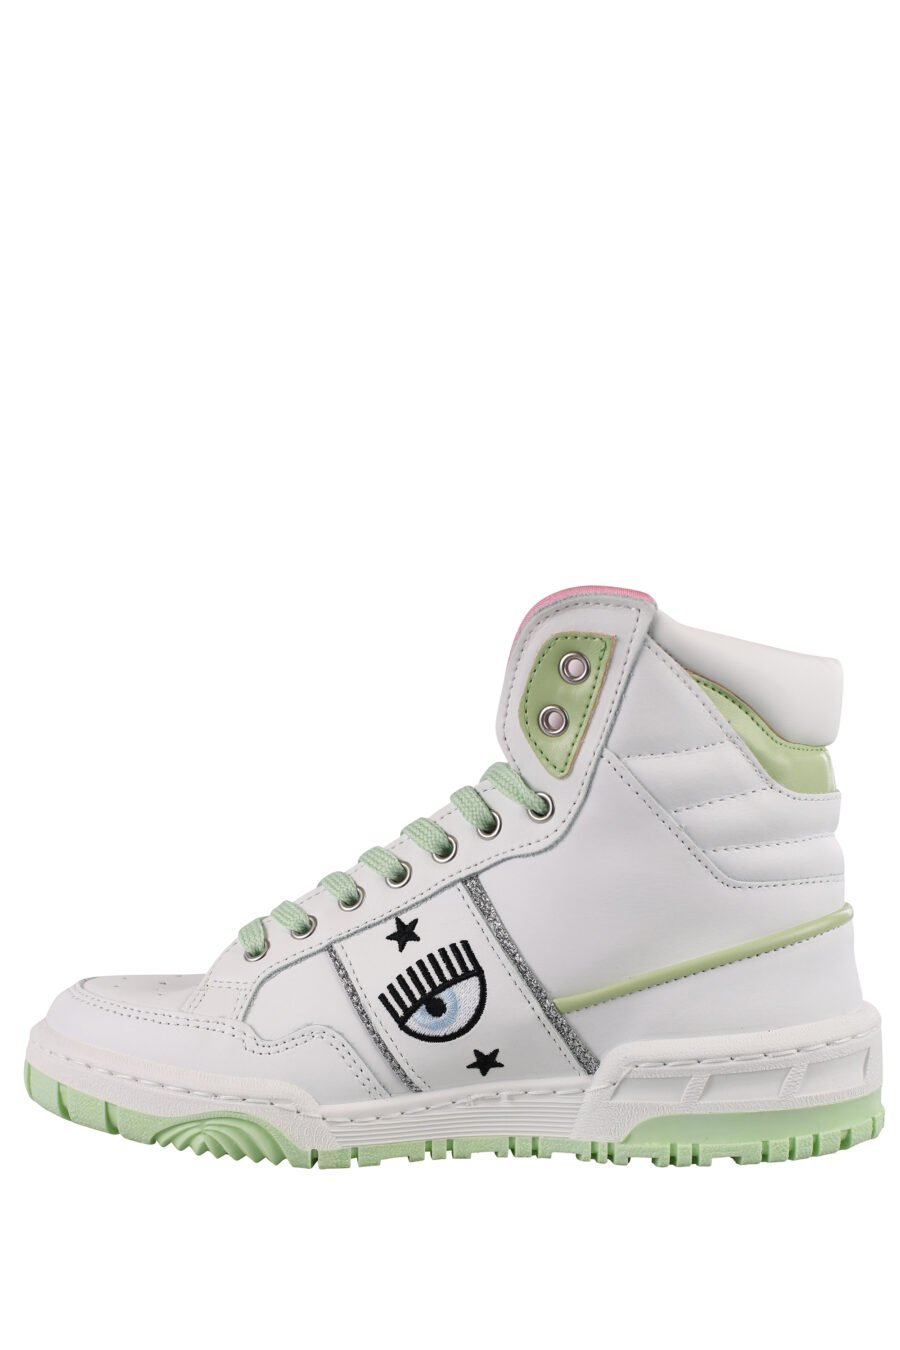 White and green trainers with eye logo and pink details - IMG 1173